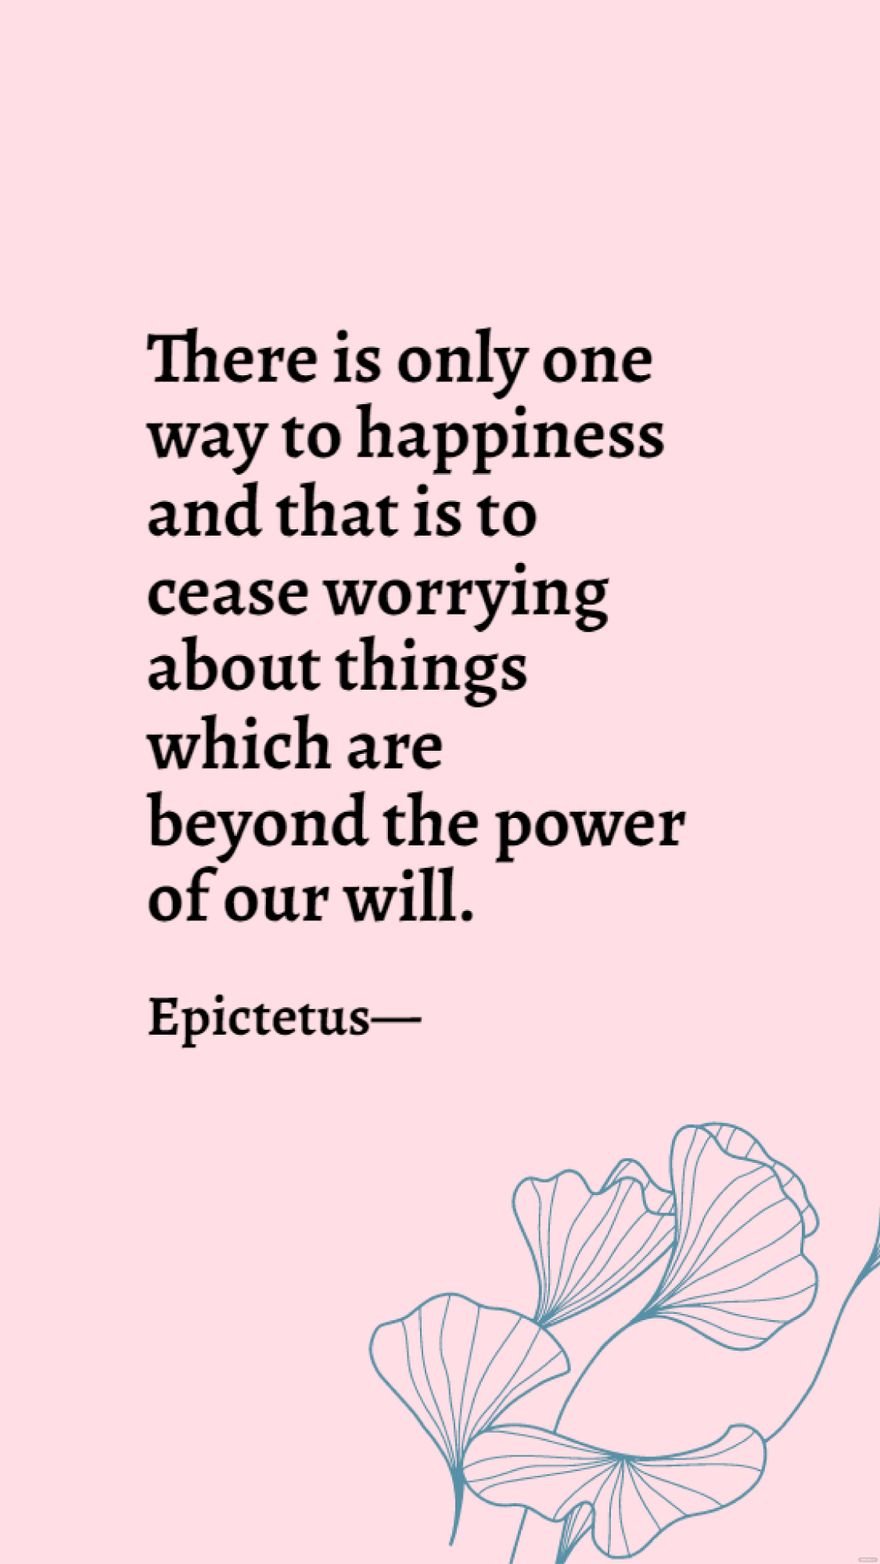 Free Epictetus - There is only one way to happiness and that is to cease worrying about things which are beyond the power of our will. in JPG